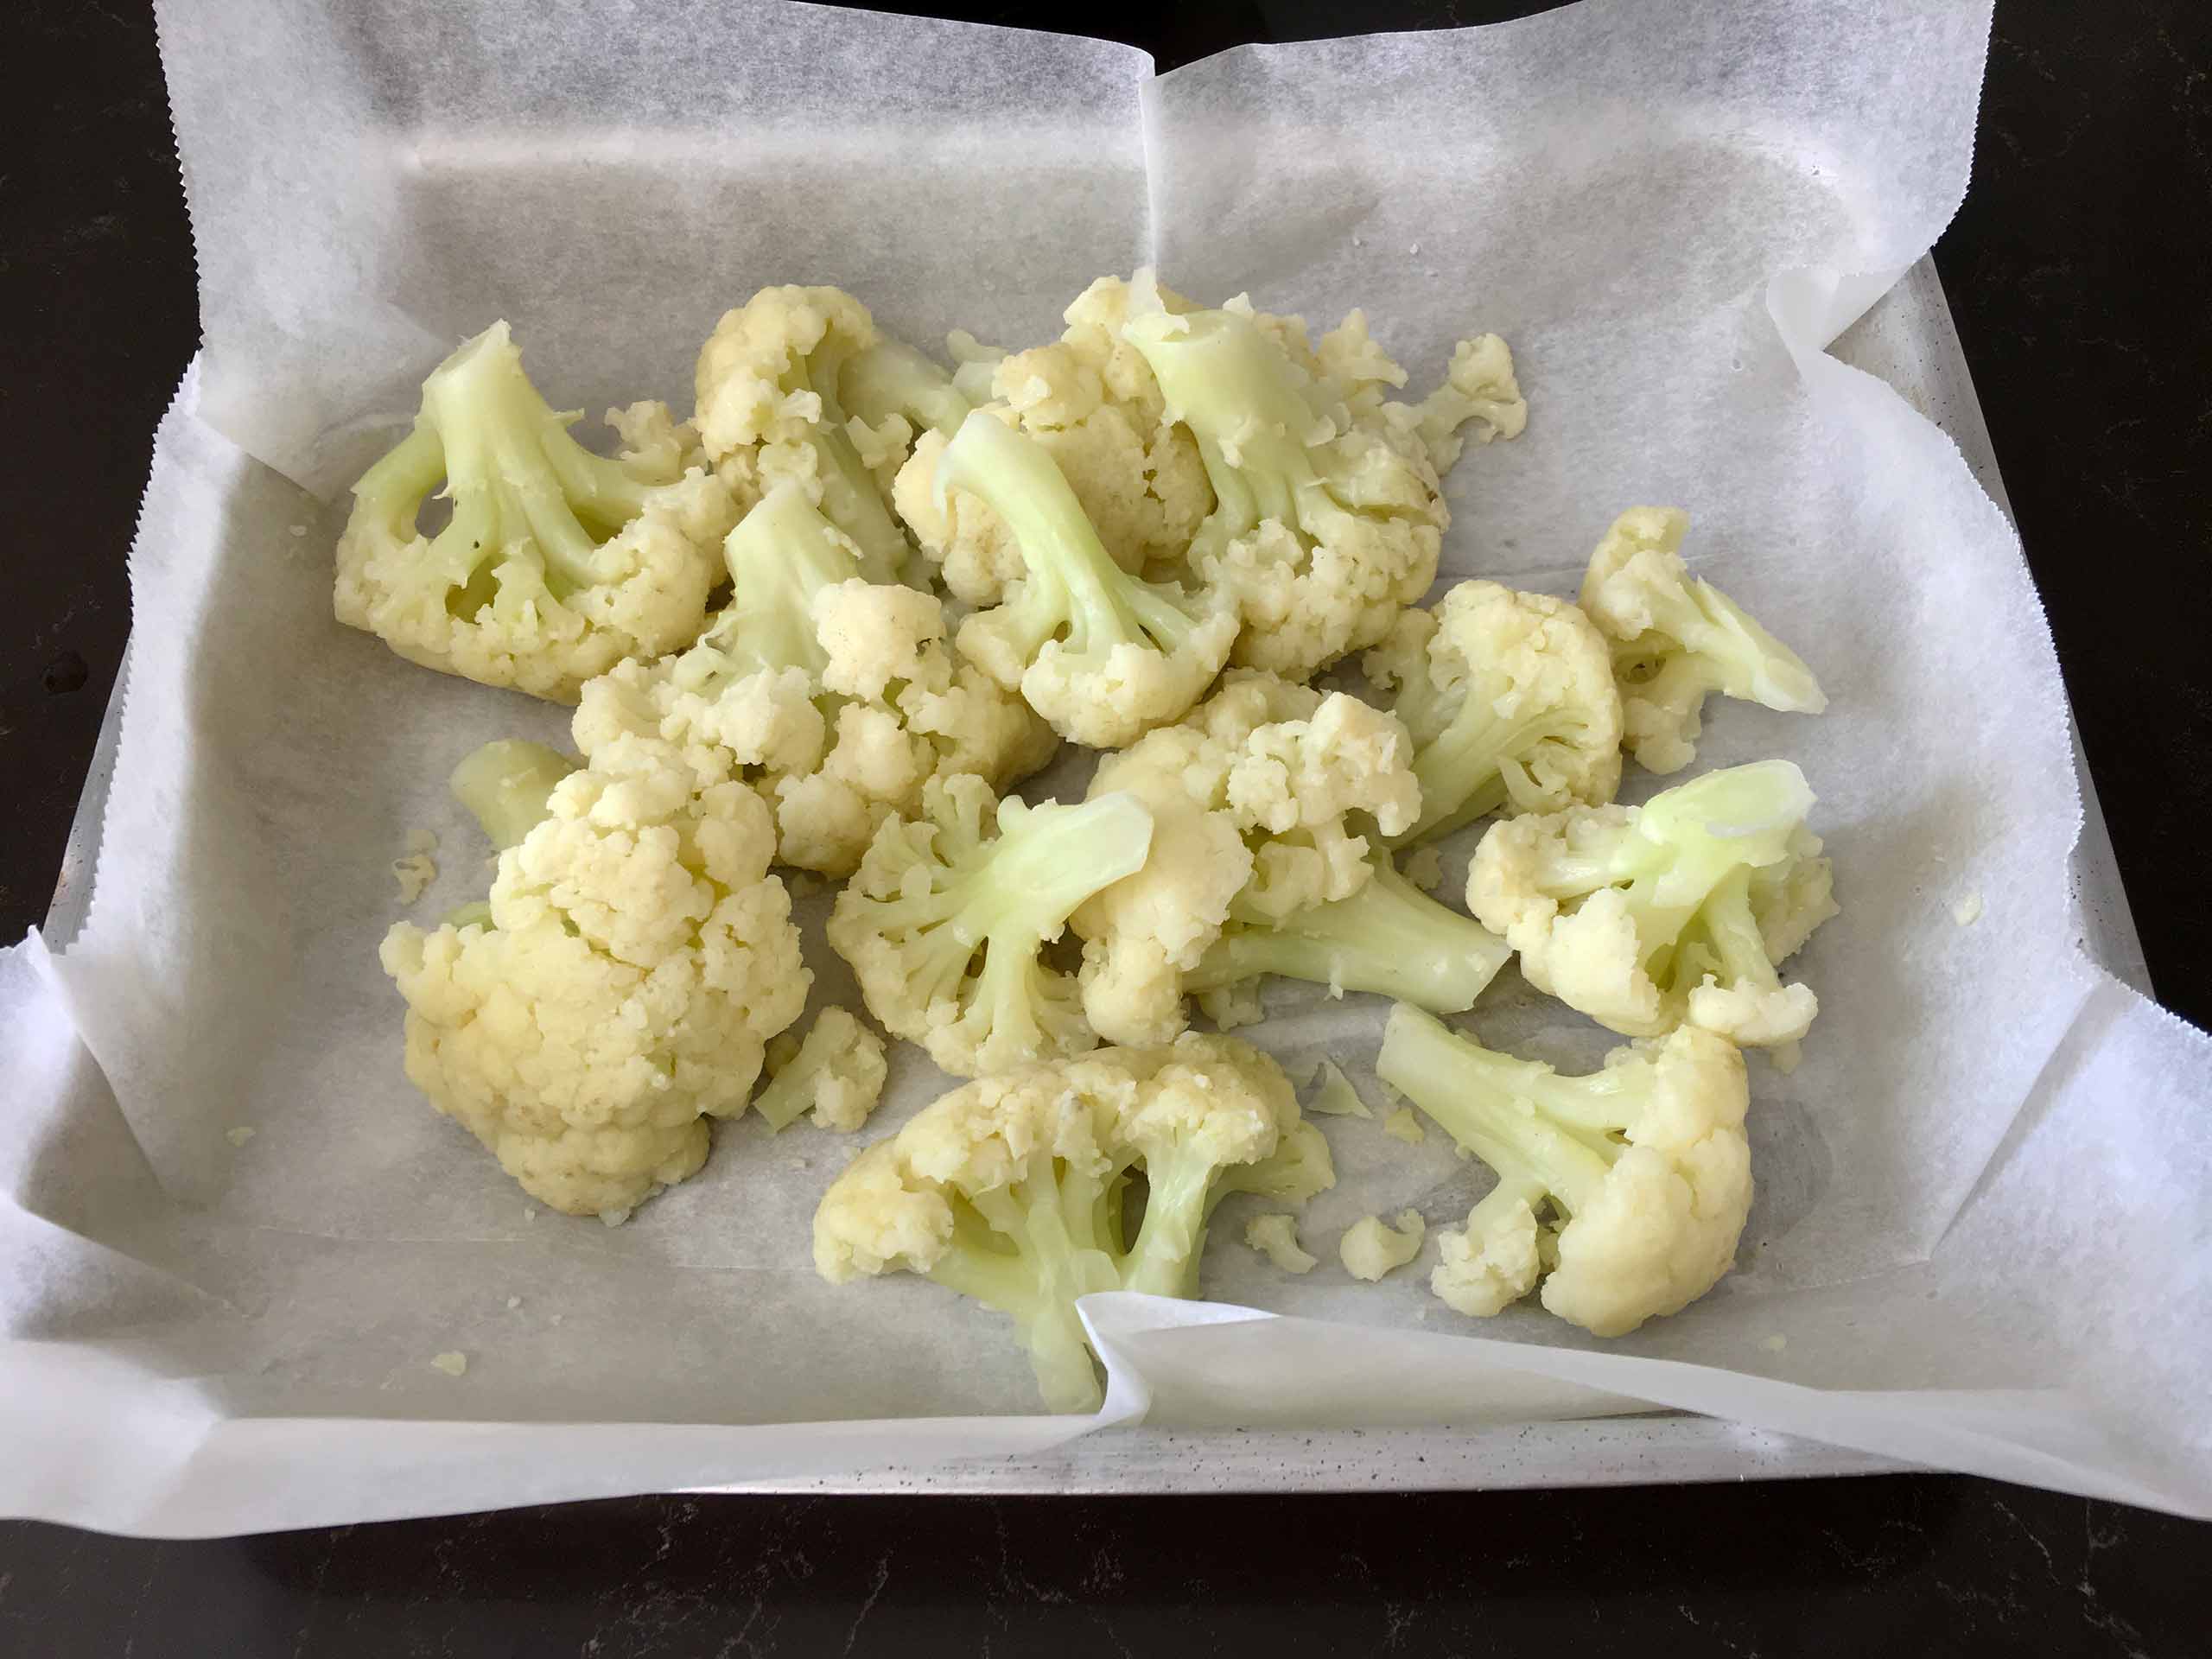 Place the cauliflower in a baking tray